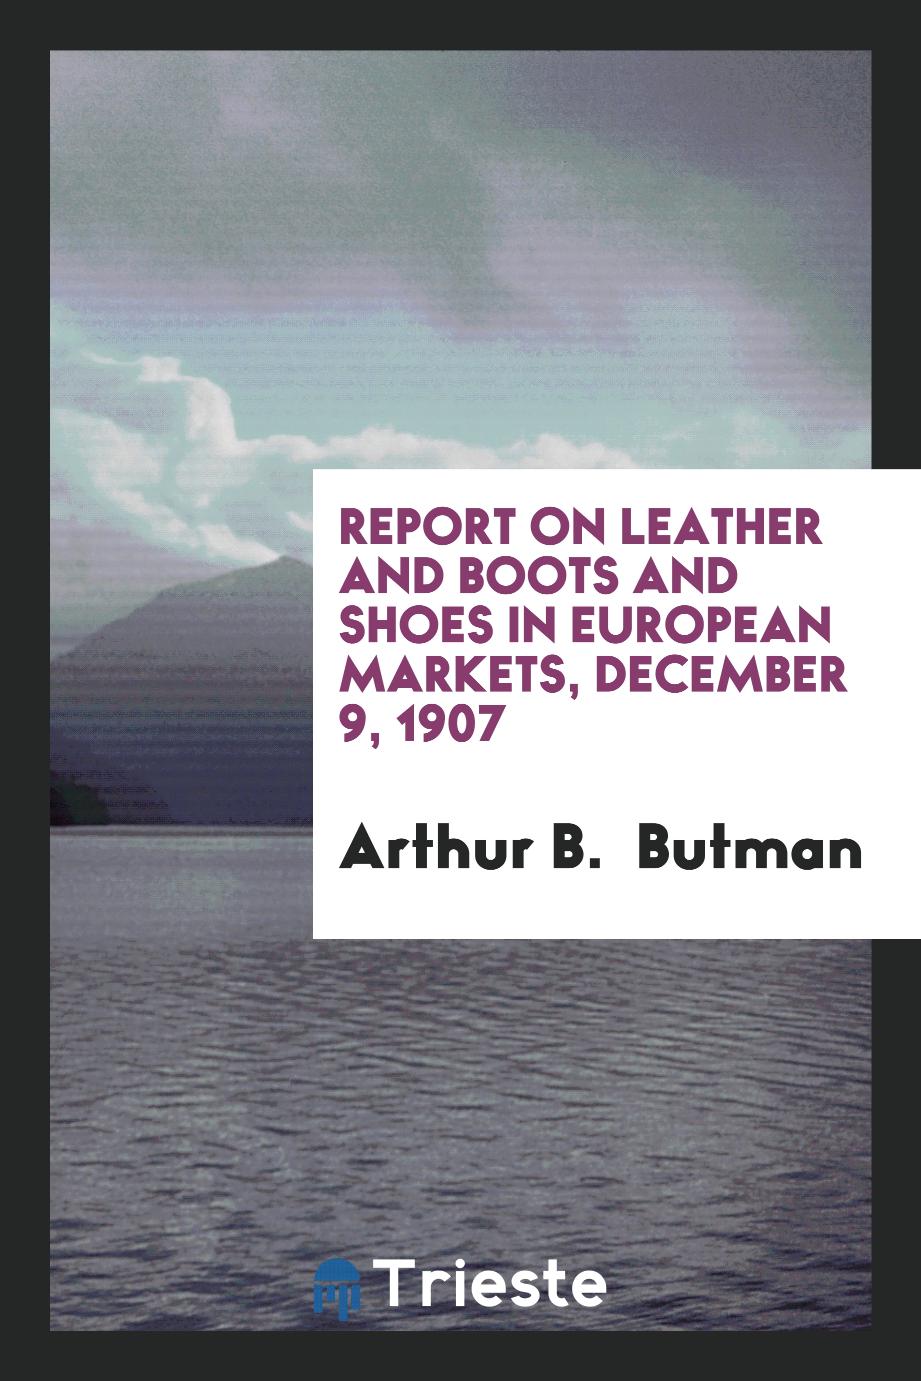 Report on leather and boots and shoes in European Markets, december 9, 1907